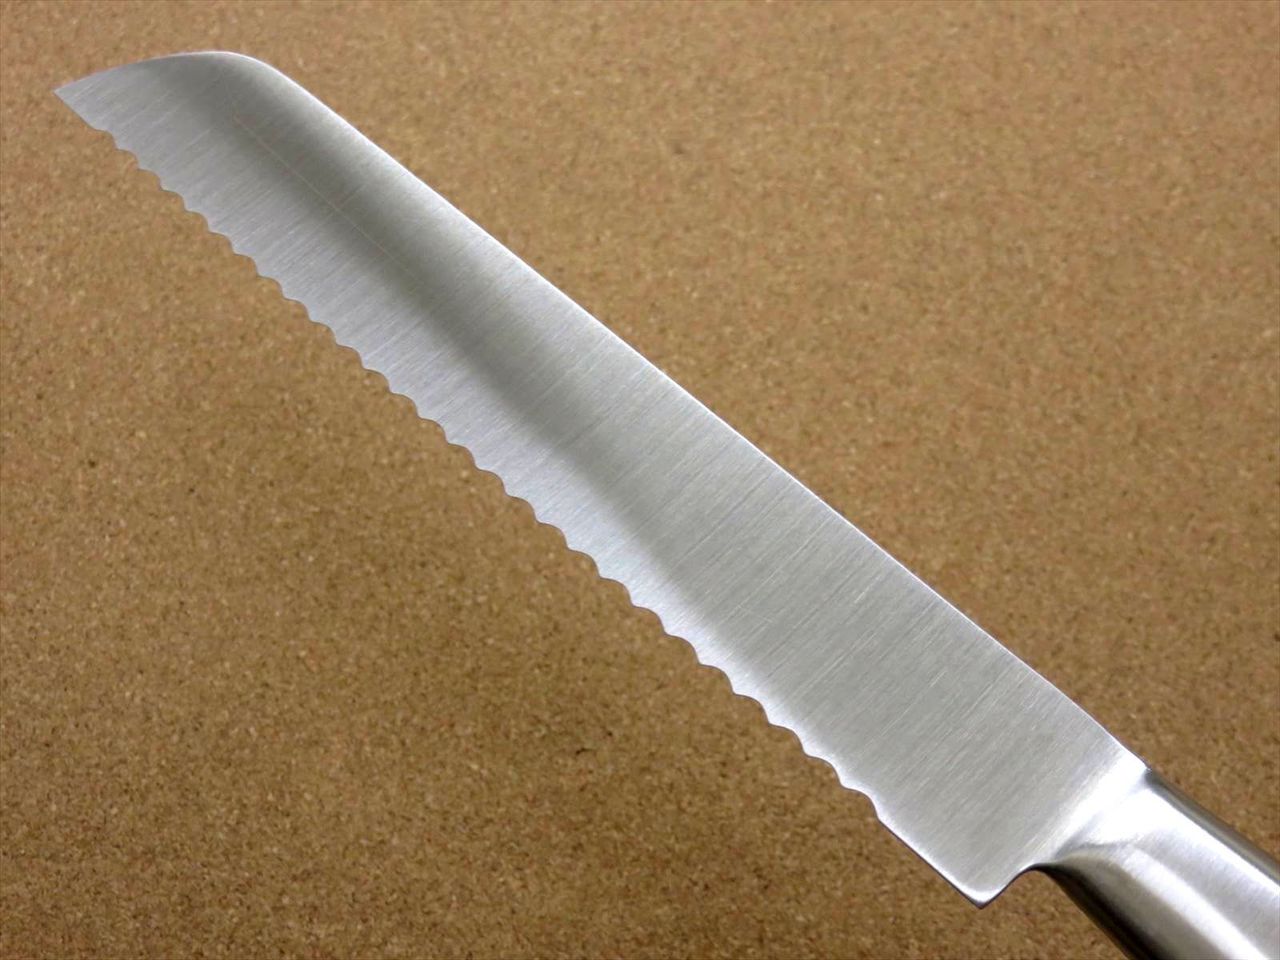 Japanese Pisces Kitchen Bread Knife 190mm 7.5 inch Stainless Handle SEKI JAPAN